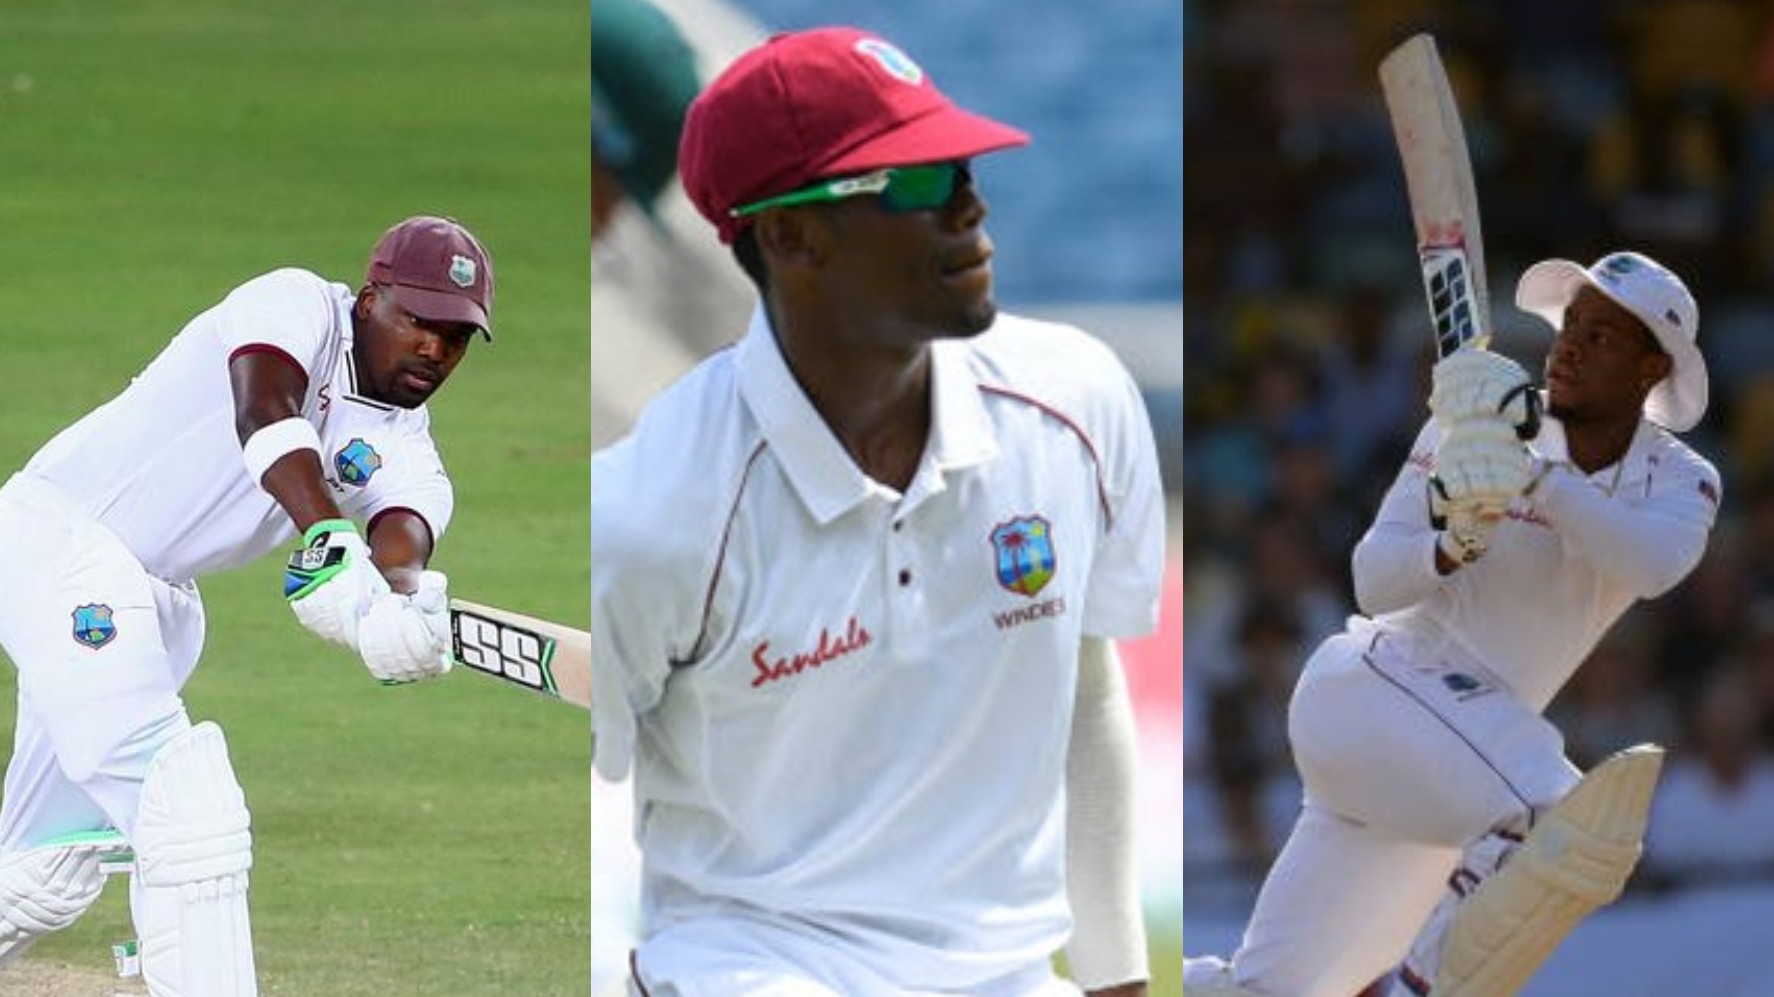 West Indies announces squad for the England tour; Hetmyer, Keemo Paul and Darren Bravo opt out